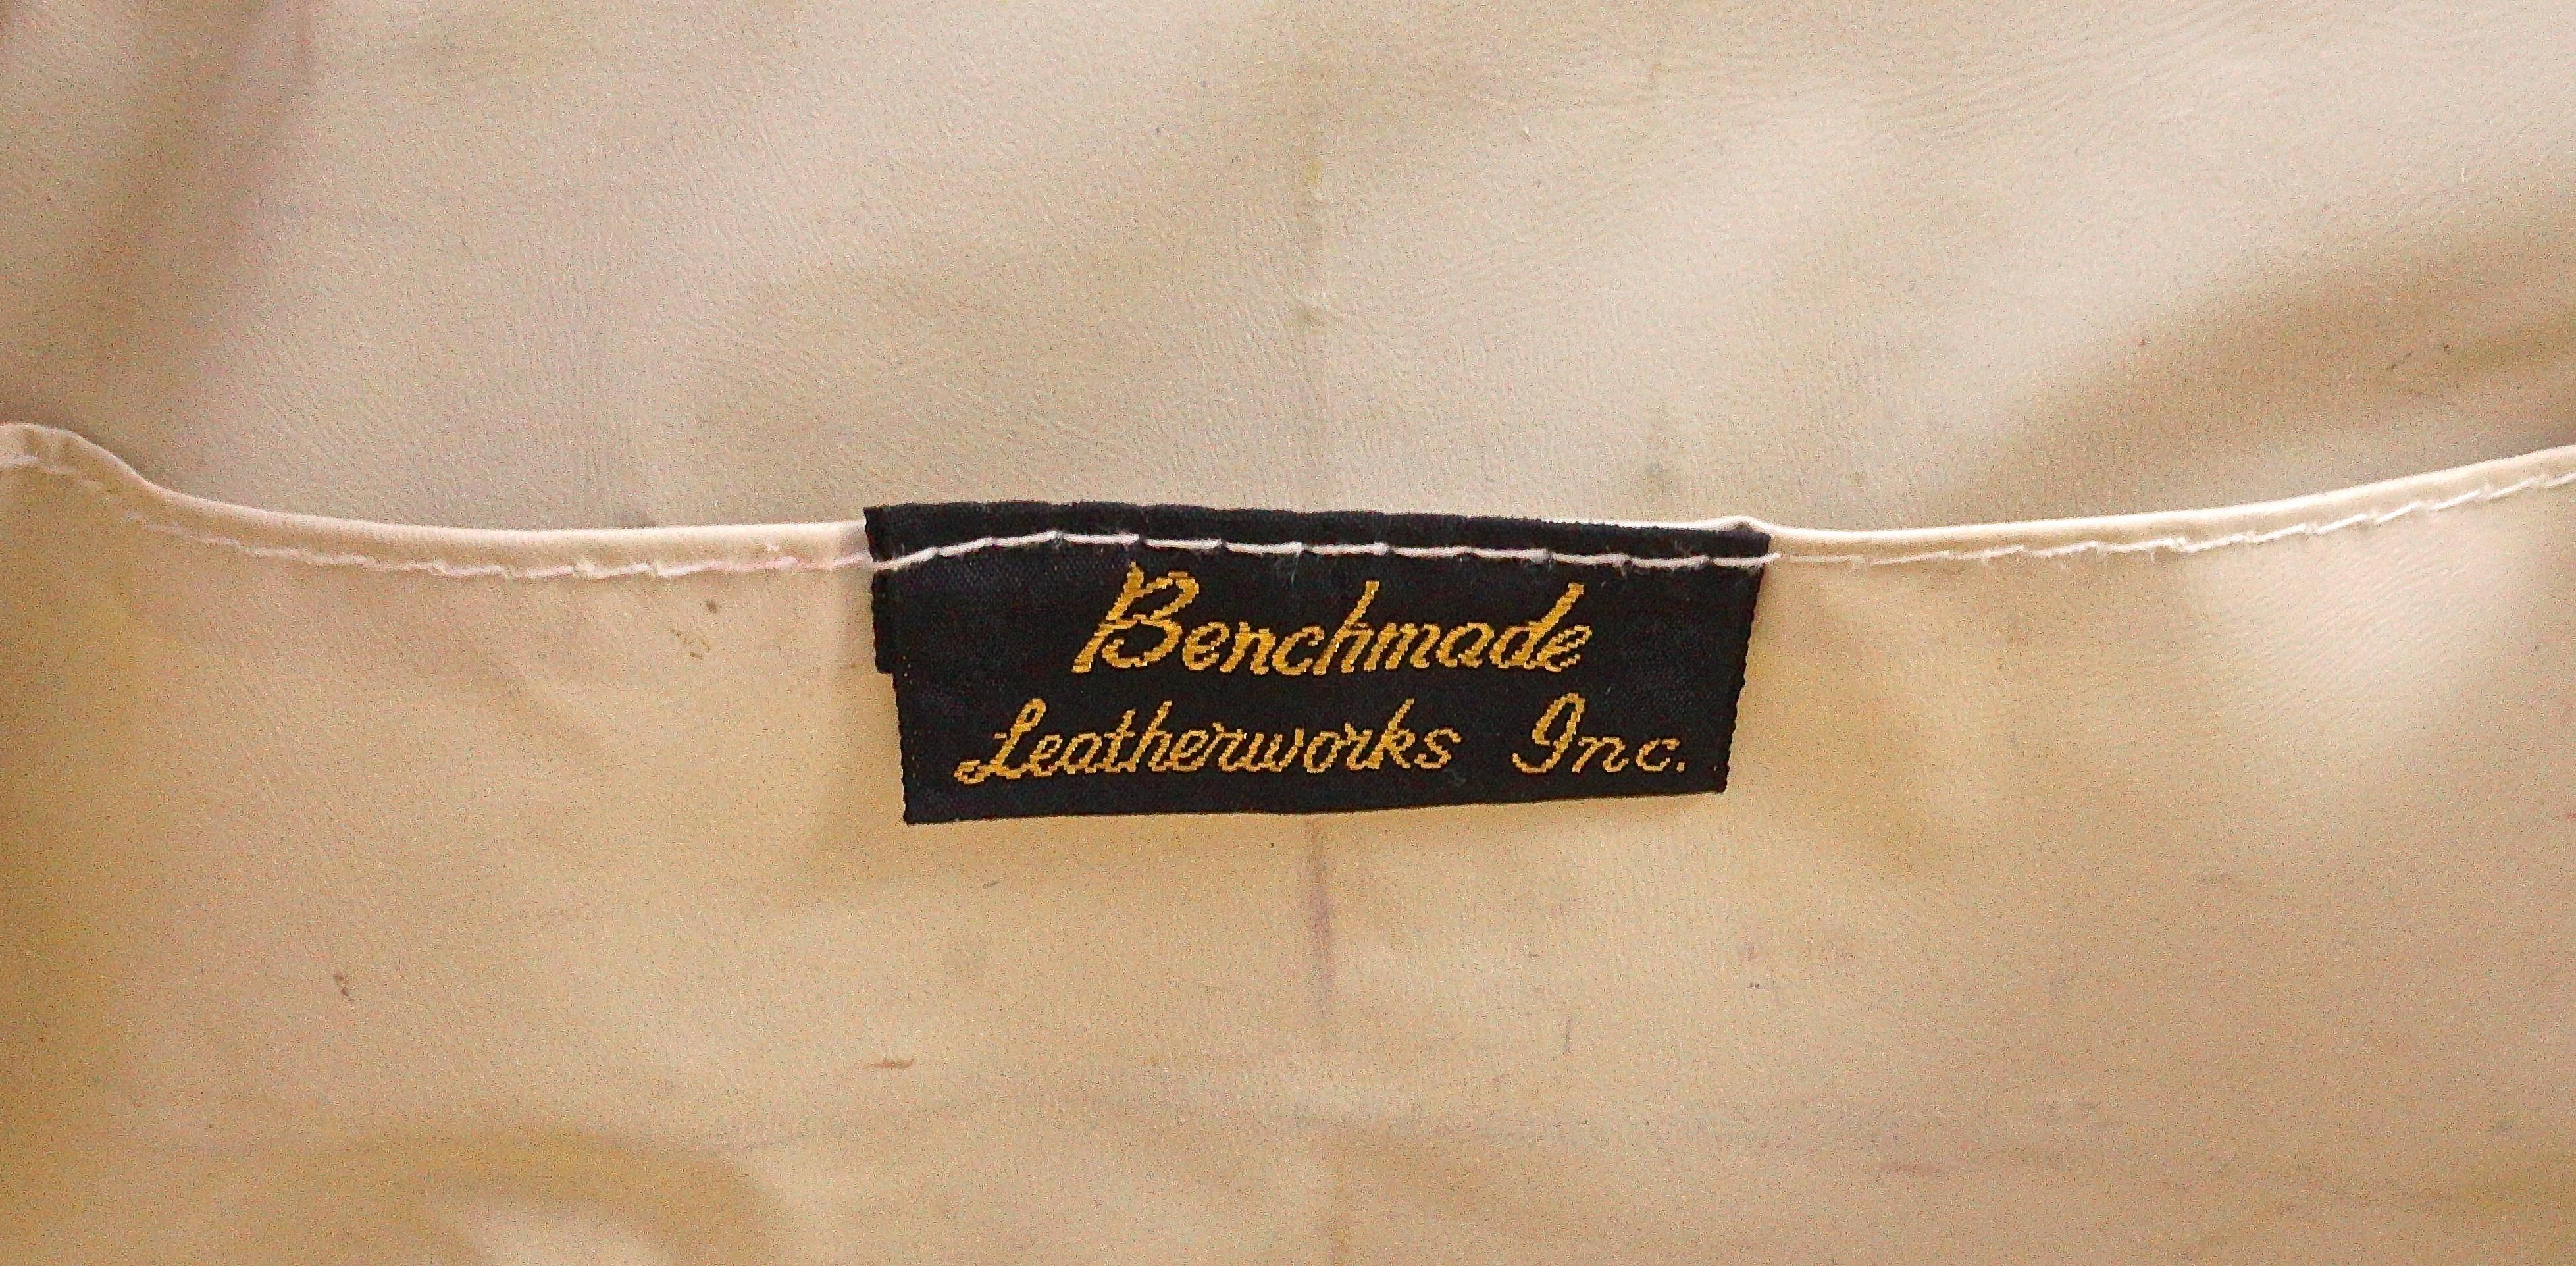 Benchmade Leatherworks Inc. Wicker and Straw Bag with Chain Strap and Mesh Clasp 1